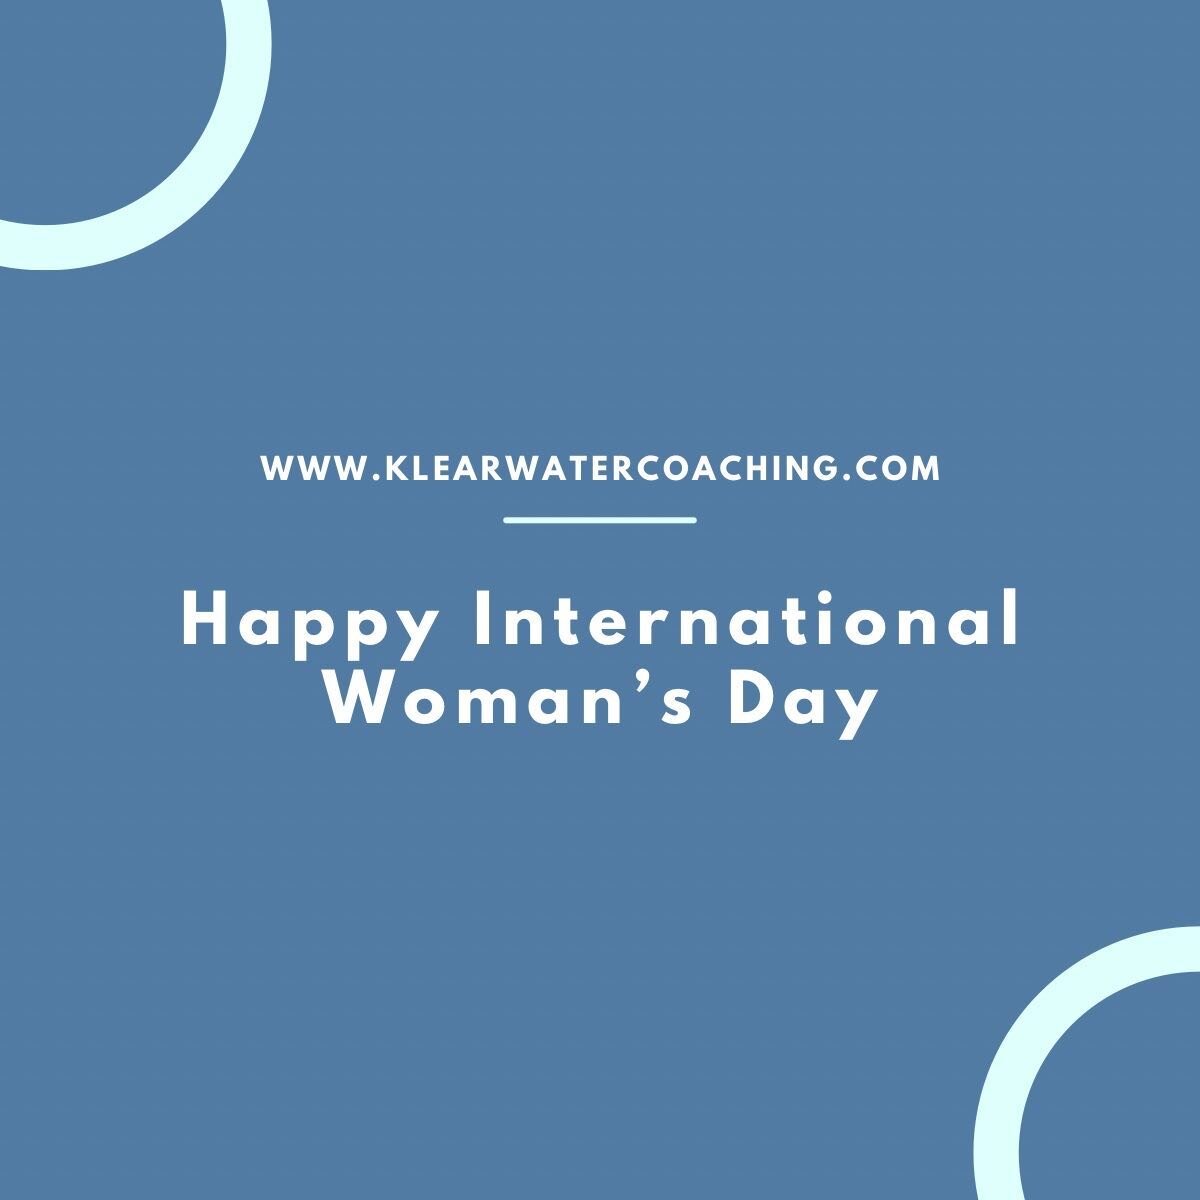 As a woman owned business, I am especially moved by this day. Thank you to all of the strong women, including my mom, who came before me to pave the way. 

Self-compassion is such an important tool for me to develop as a business owner. I have also w